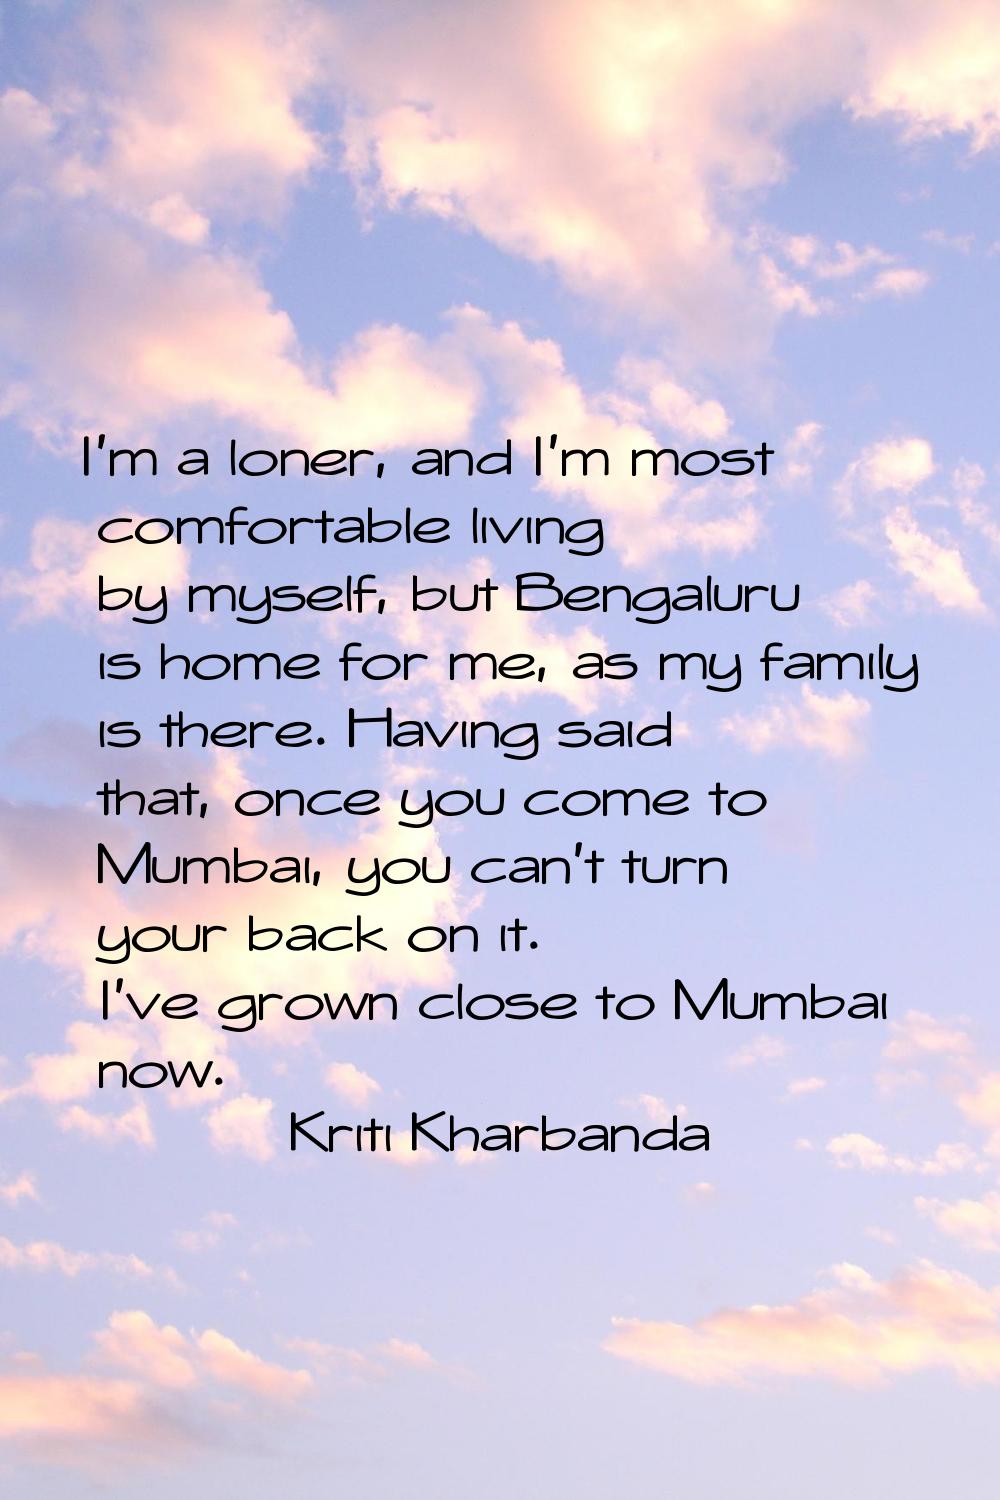 I'm a loner, and I'm most comfortable living by myself, but Bengaluru is home for me, as my family 